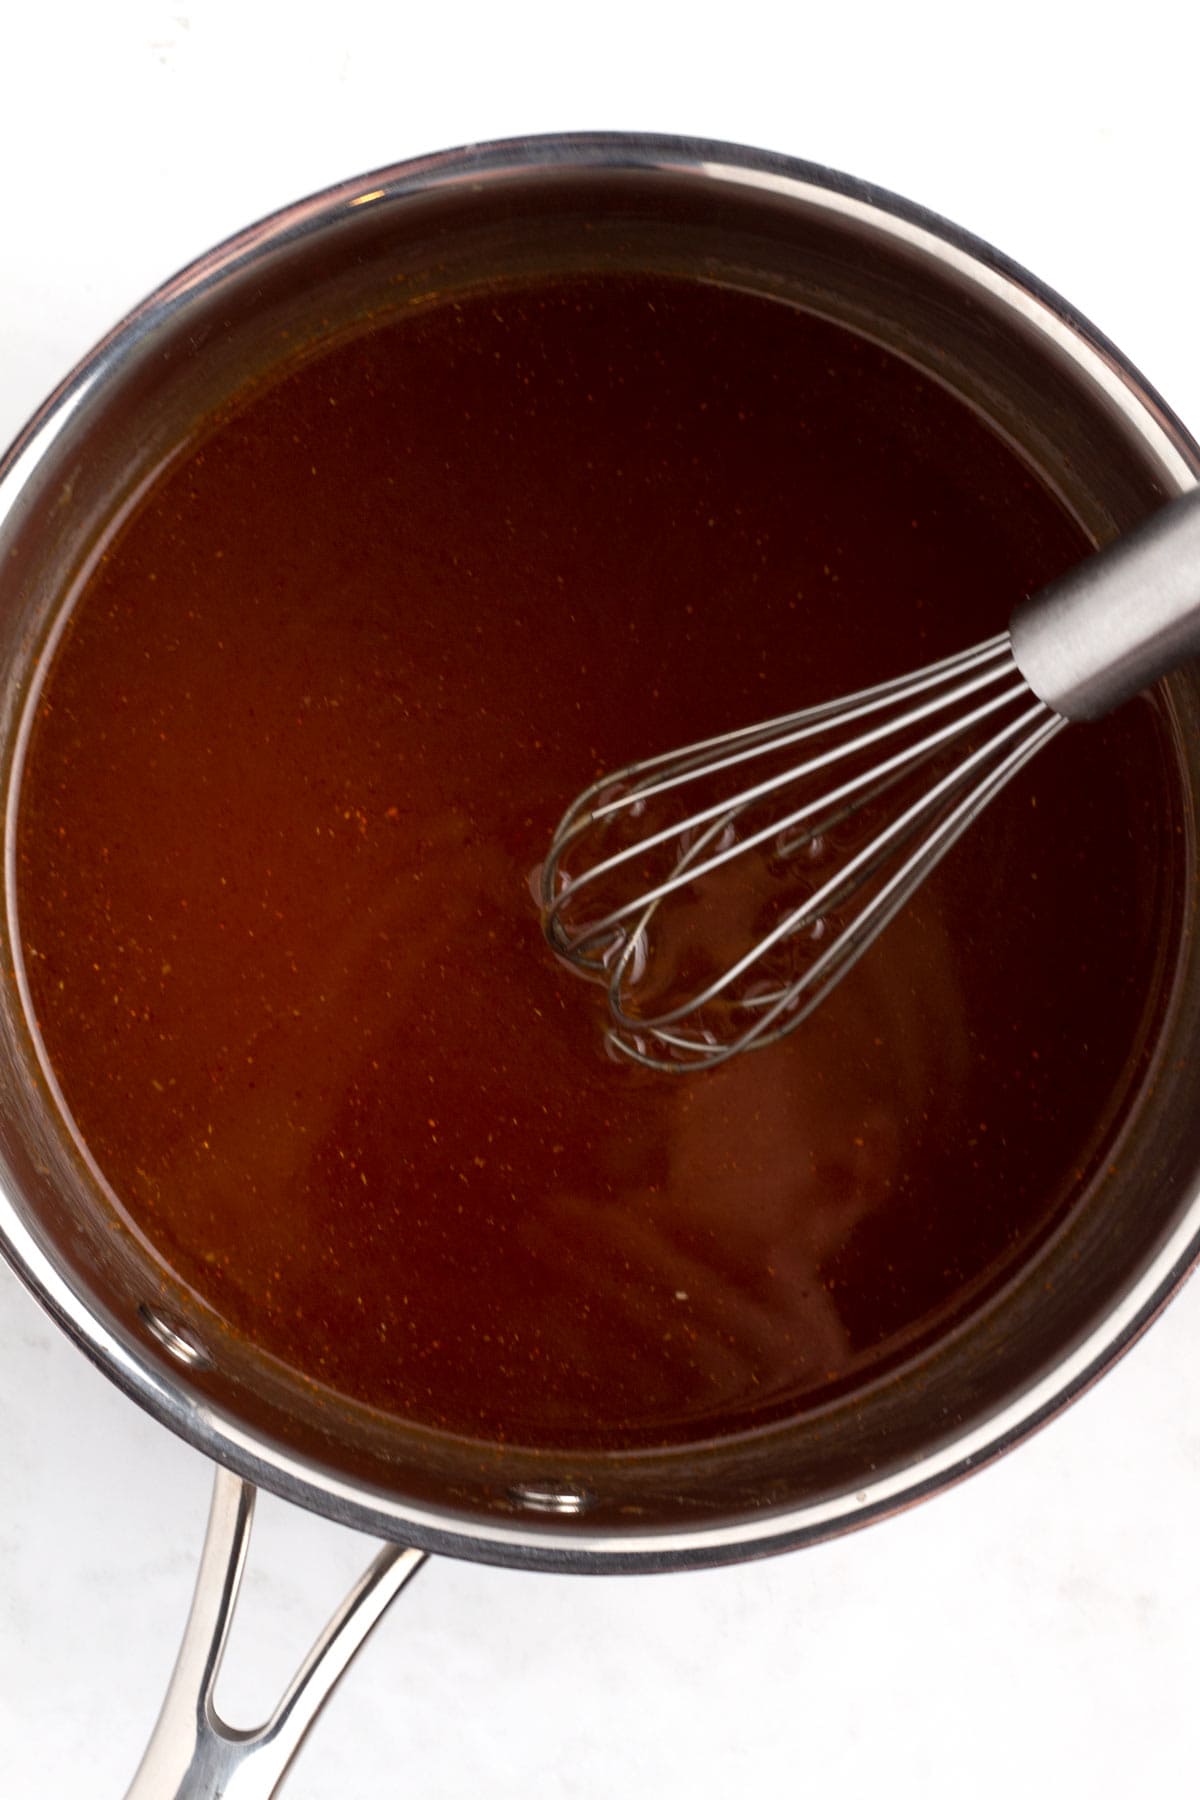 Overhead view of a silver pot with a brown glaze mixed together and a whisk resting on the edge of the pan.